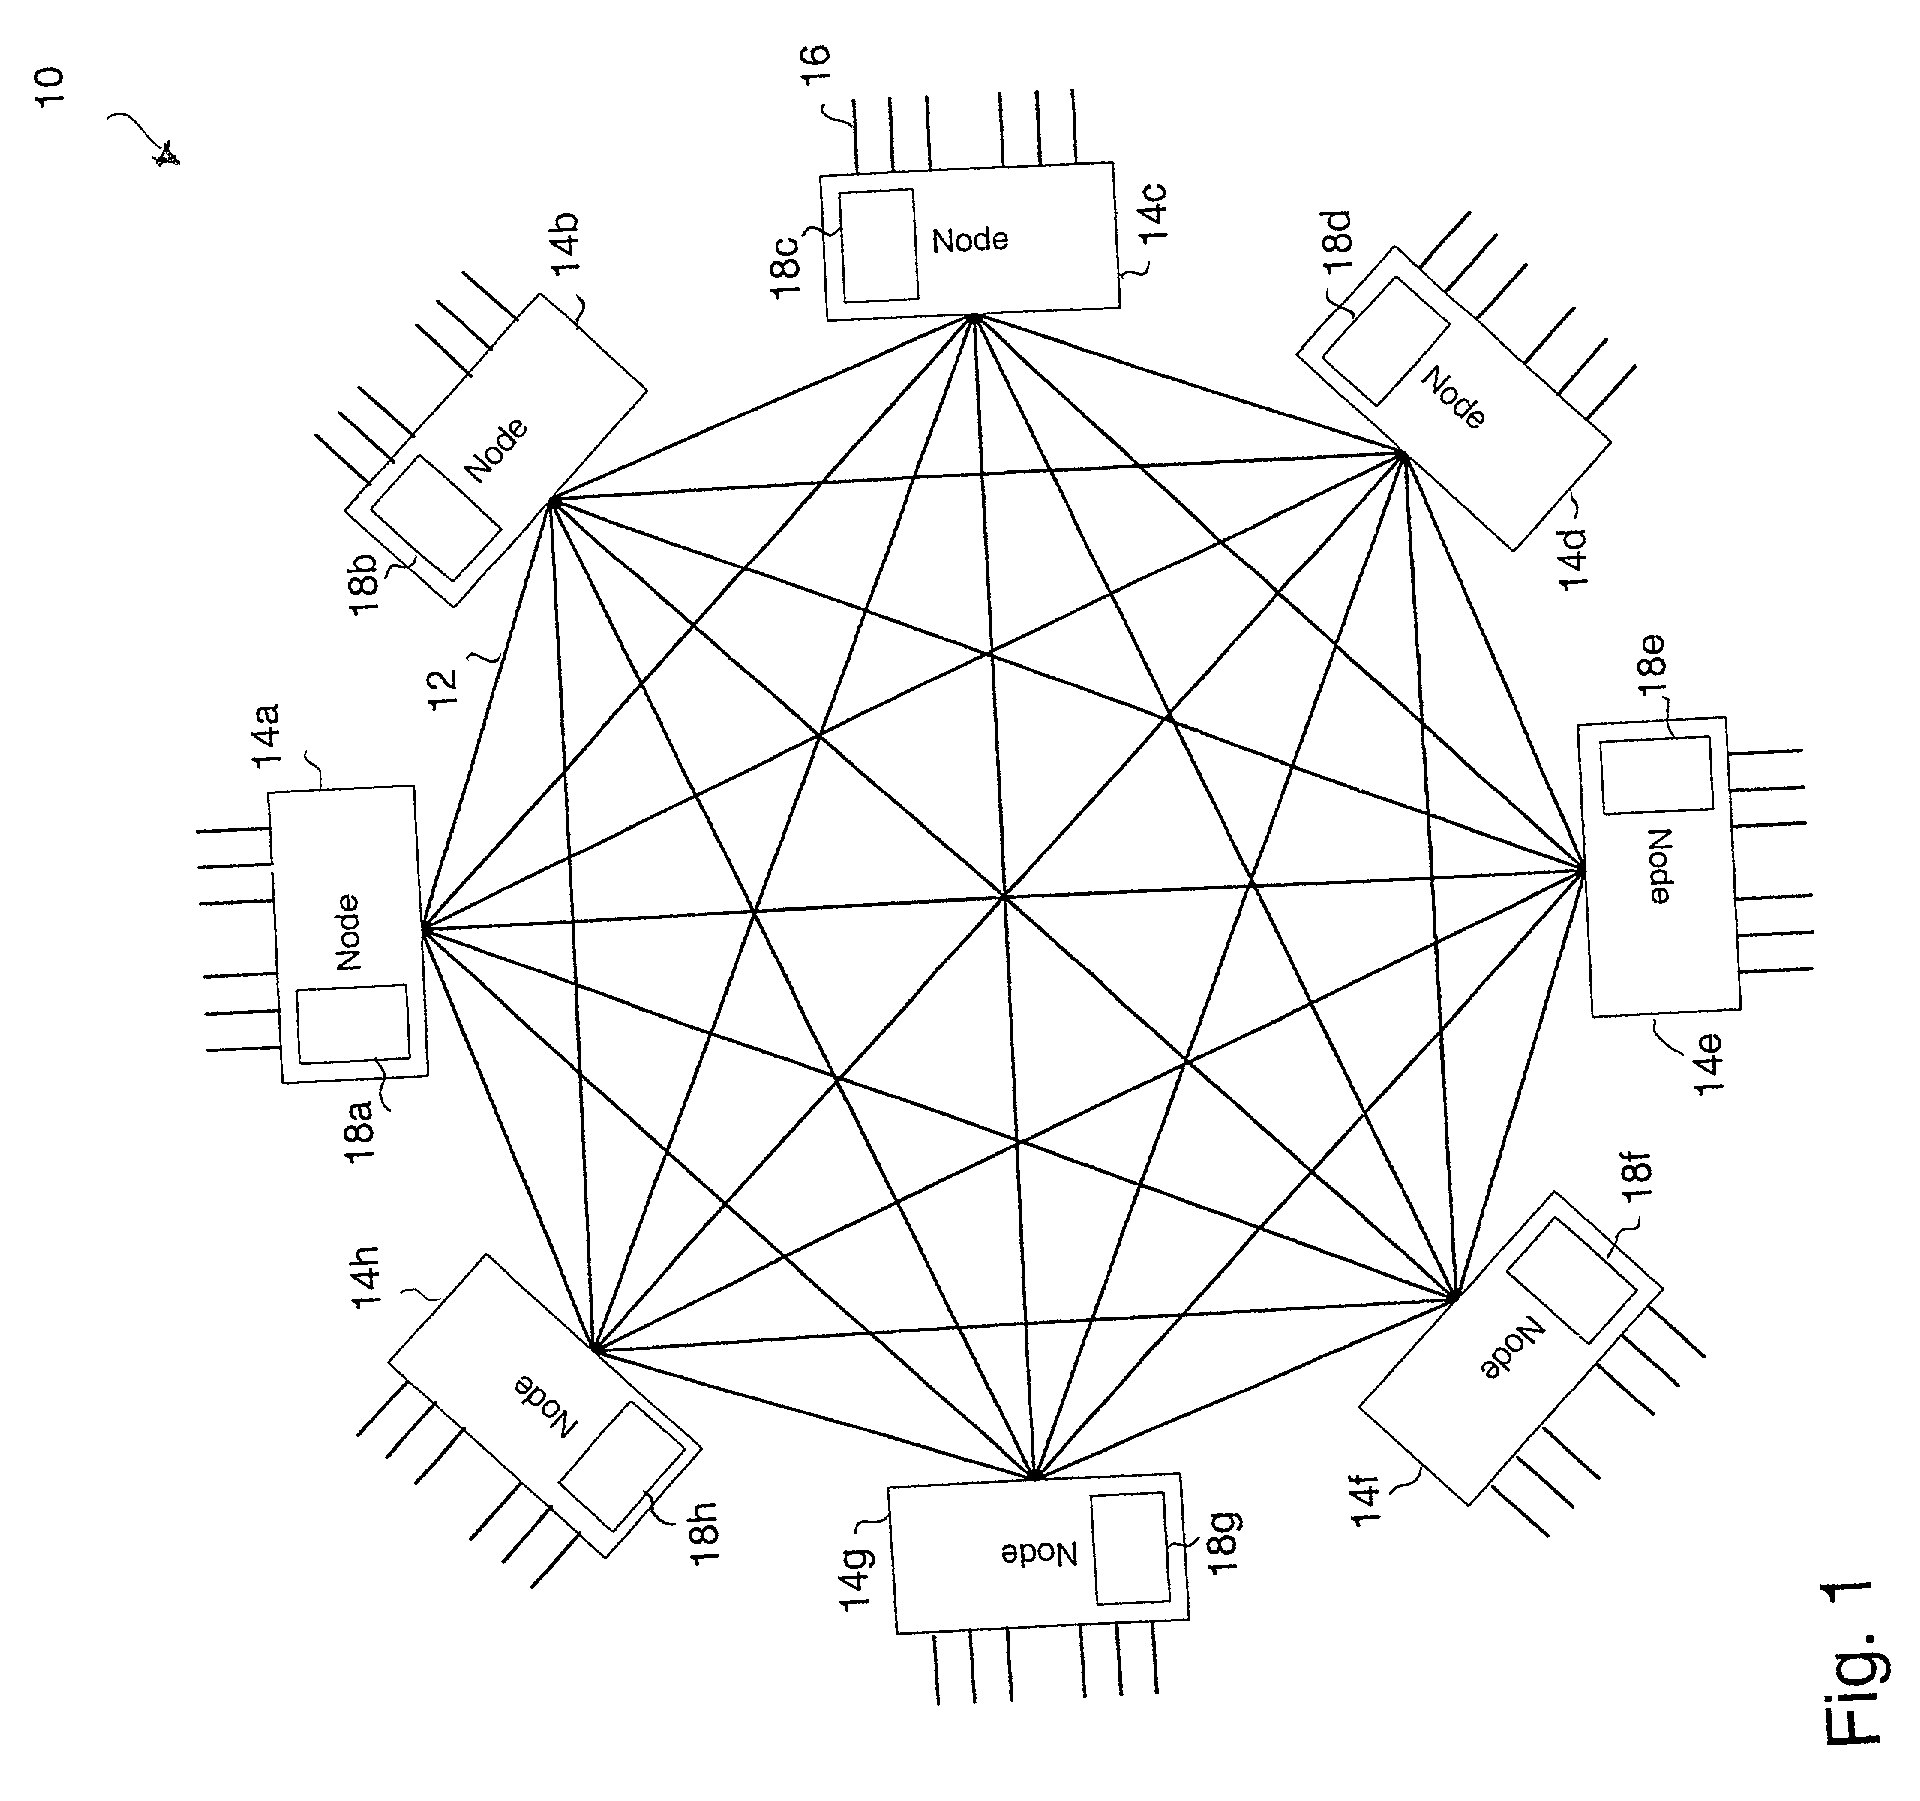 Method of communicating data in an interconnect system